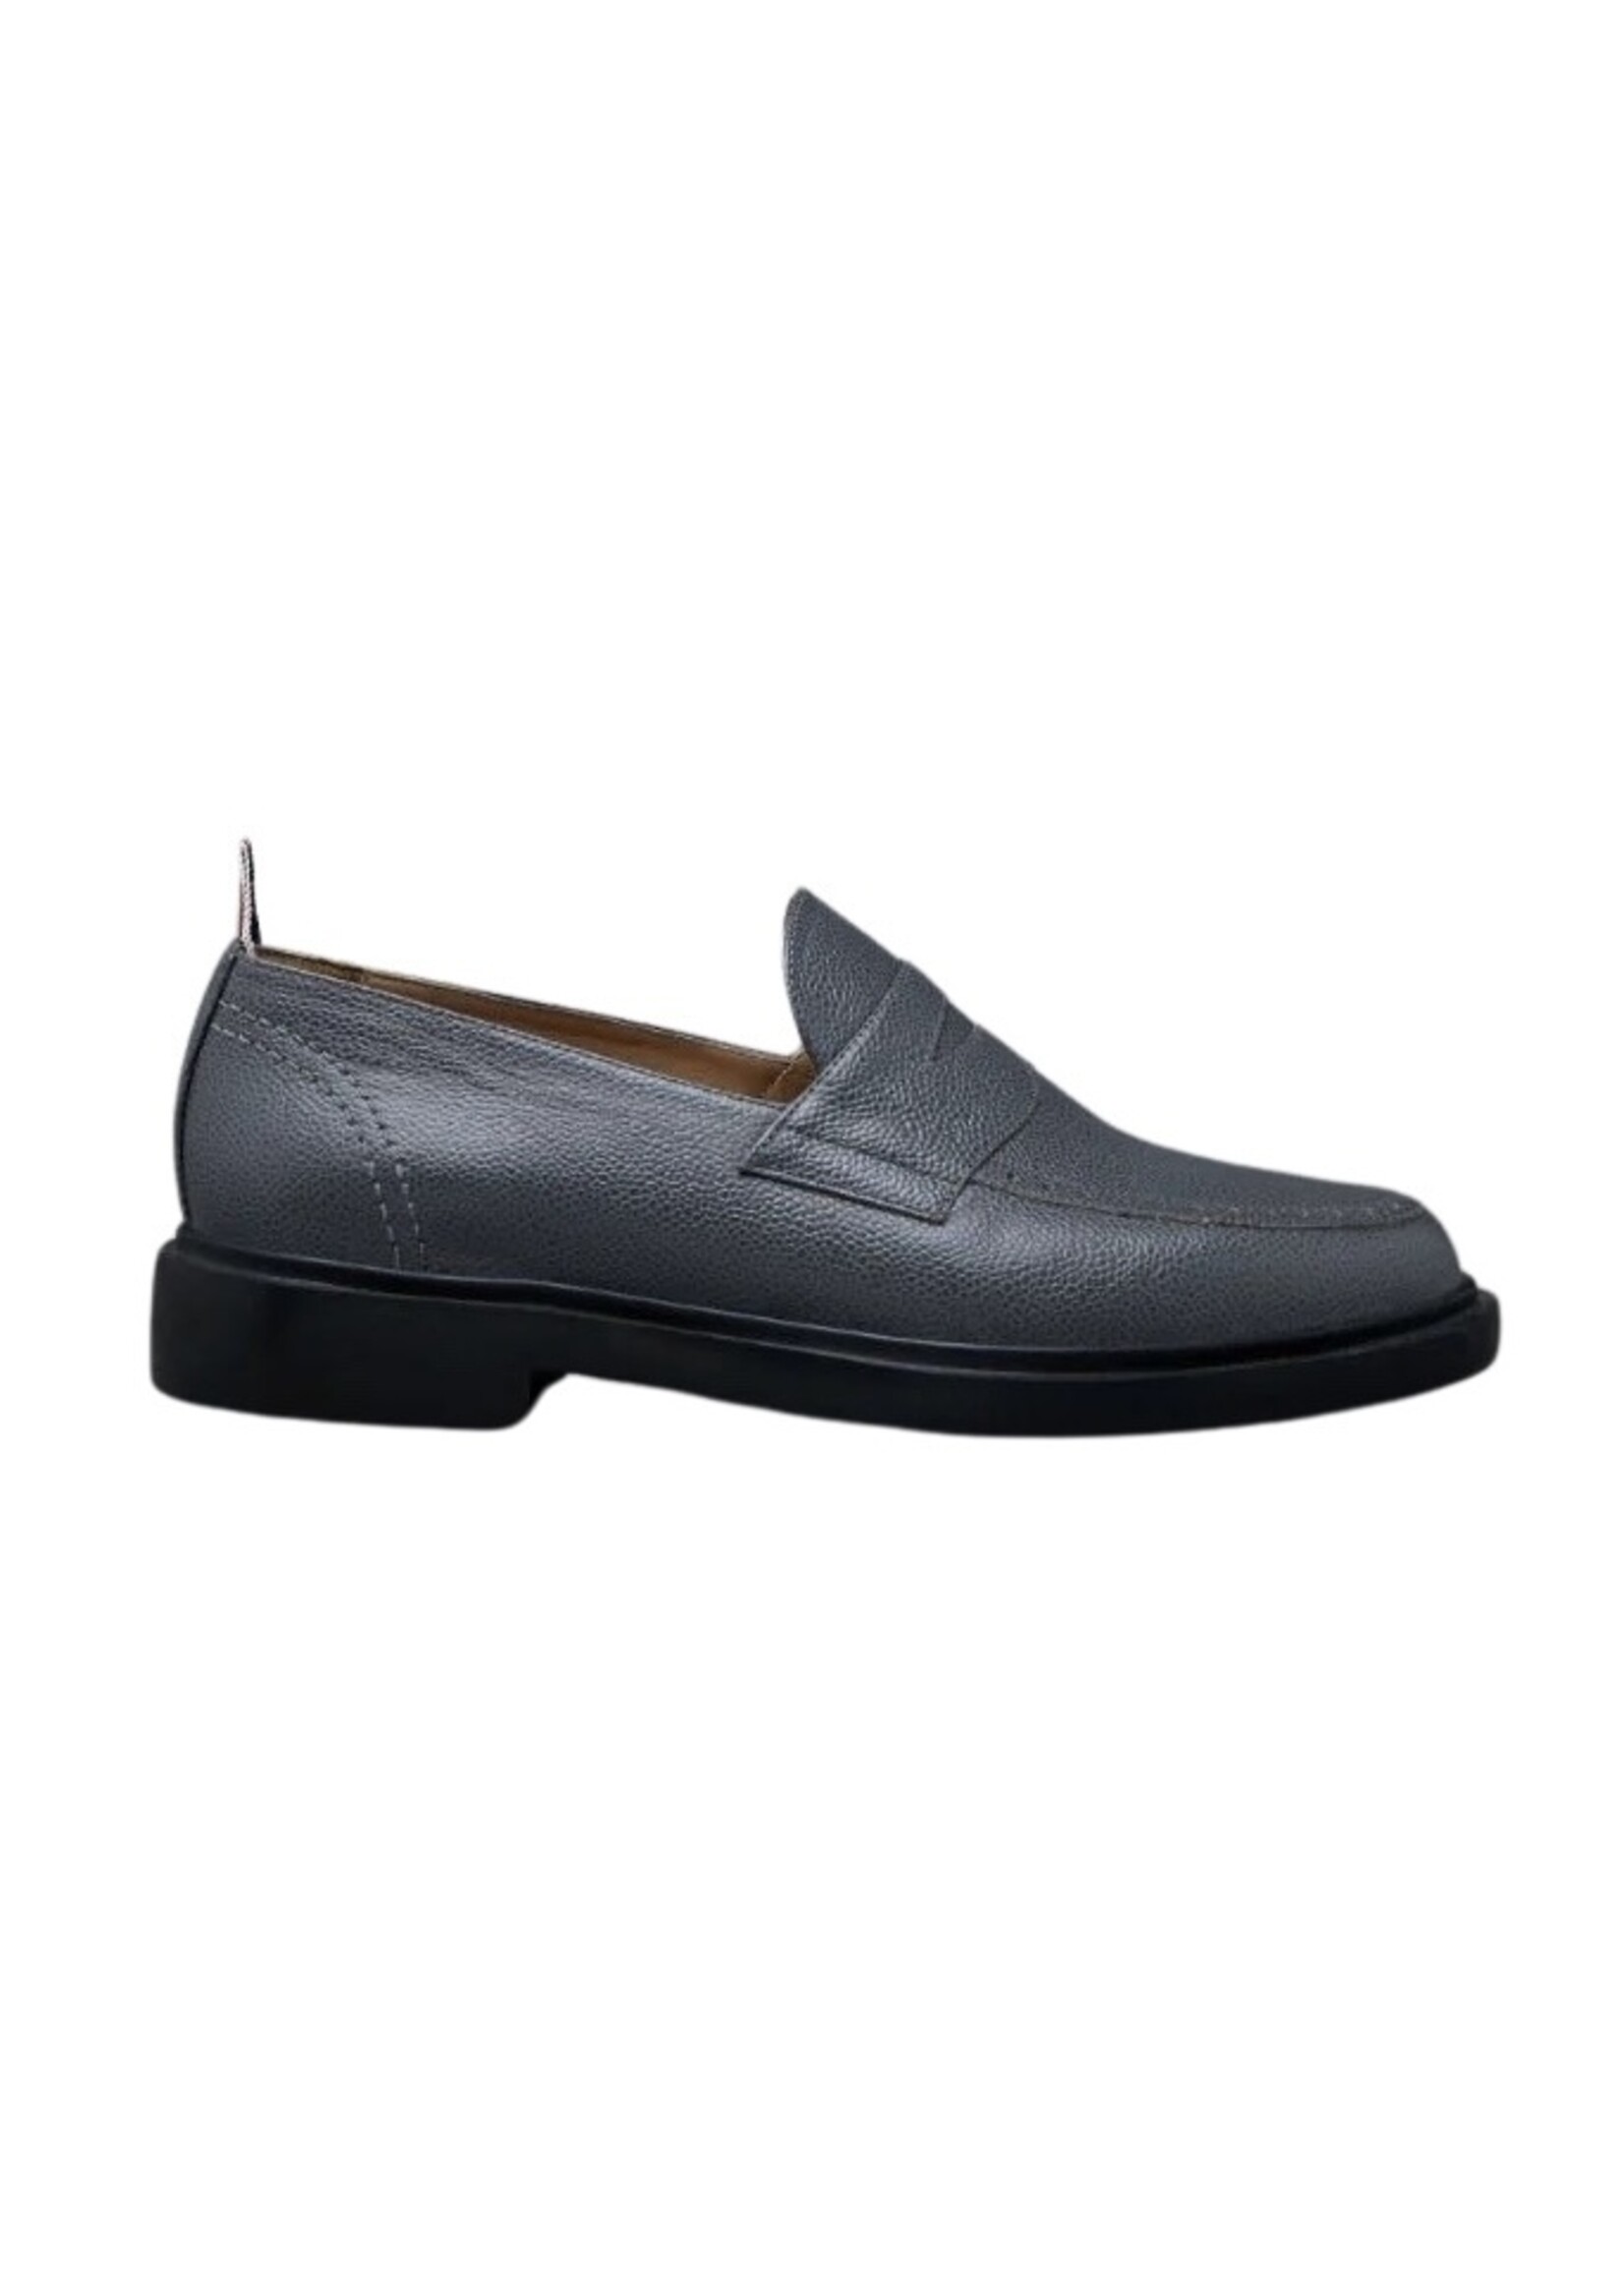 THOM BROWNE PEBBLE GRAIN PENNY LOAFER